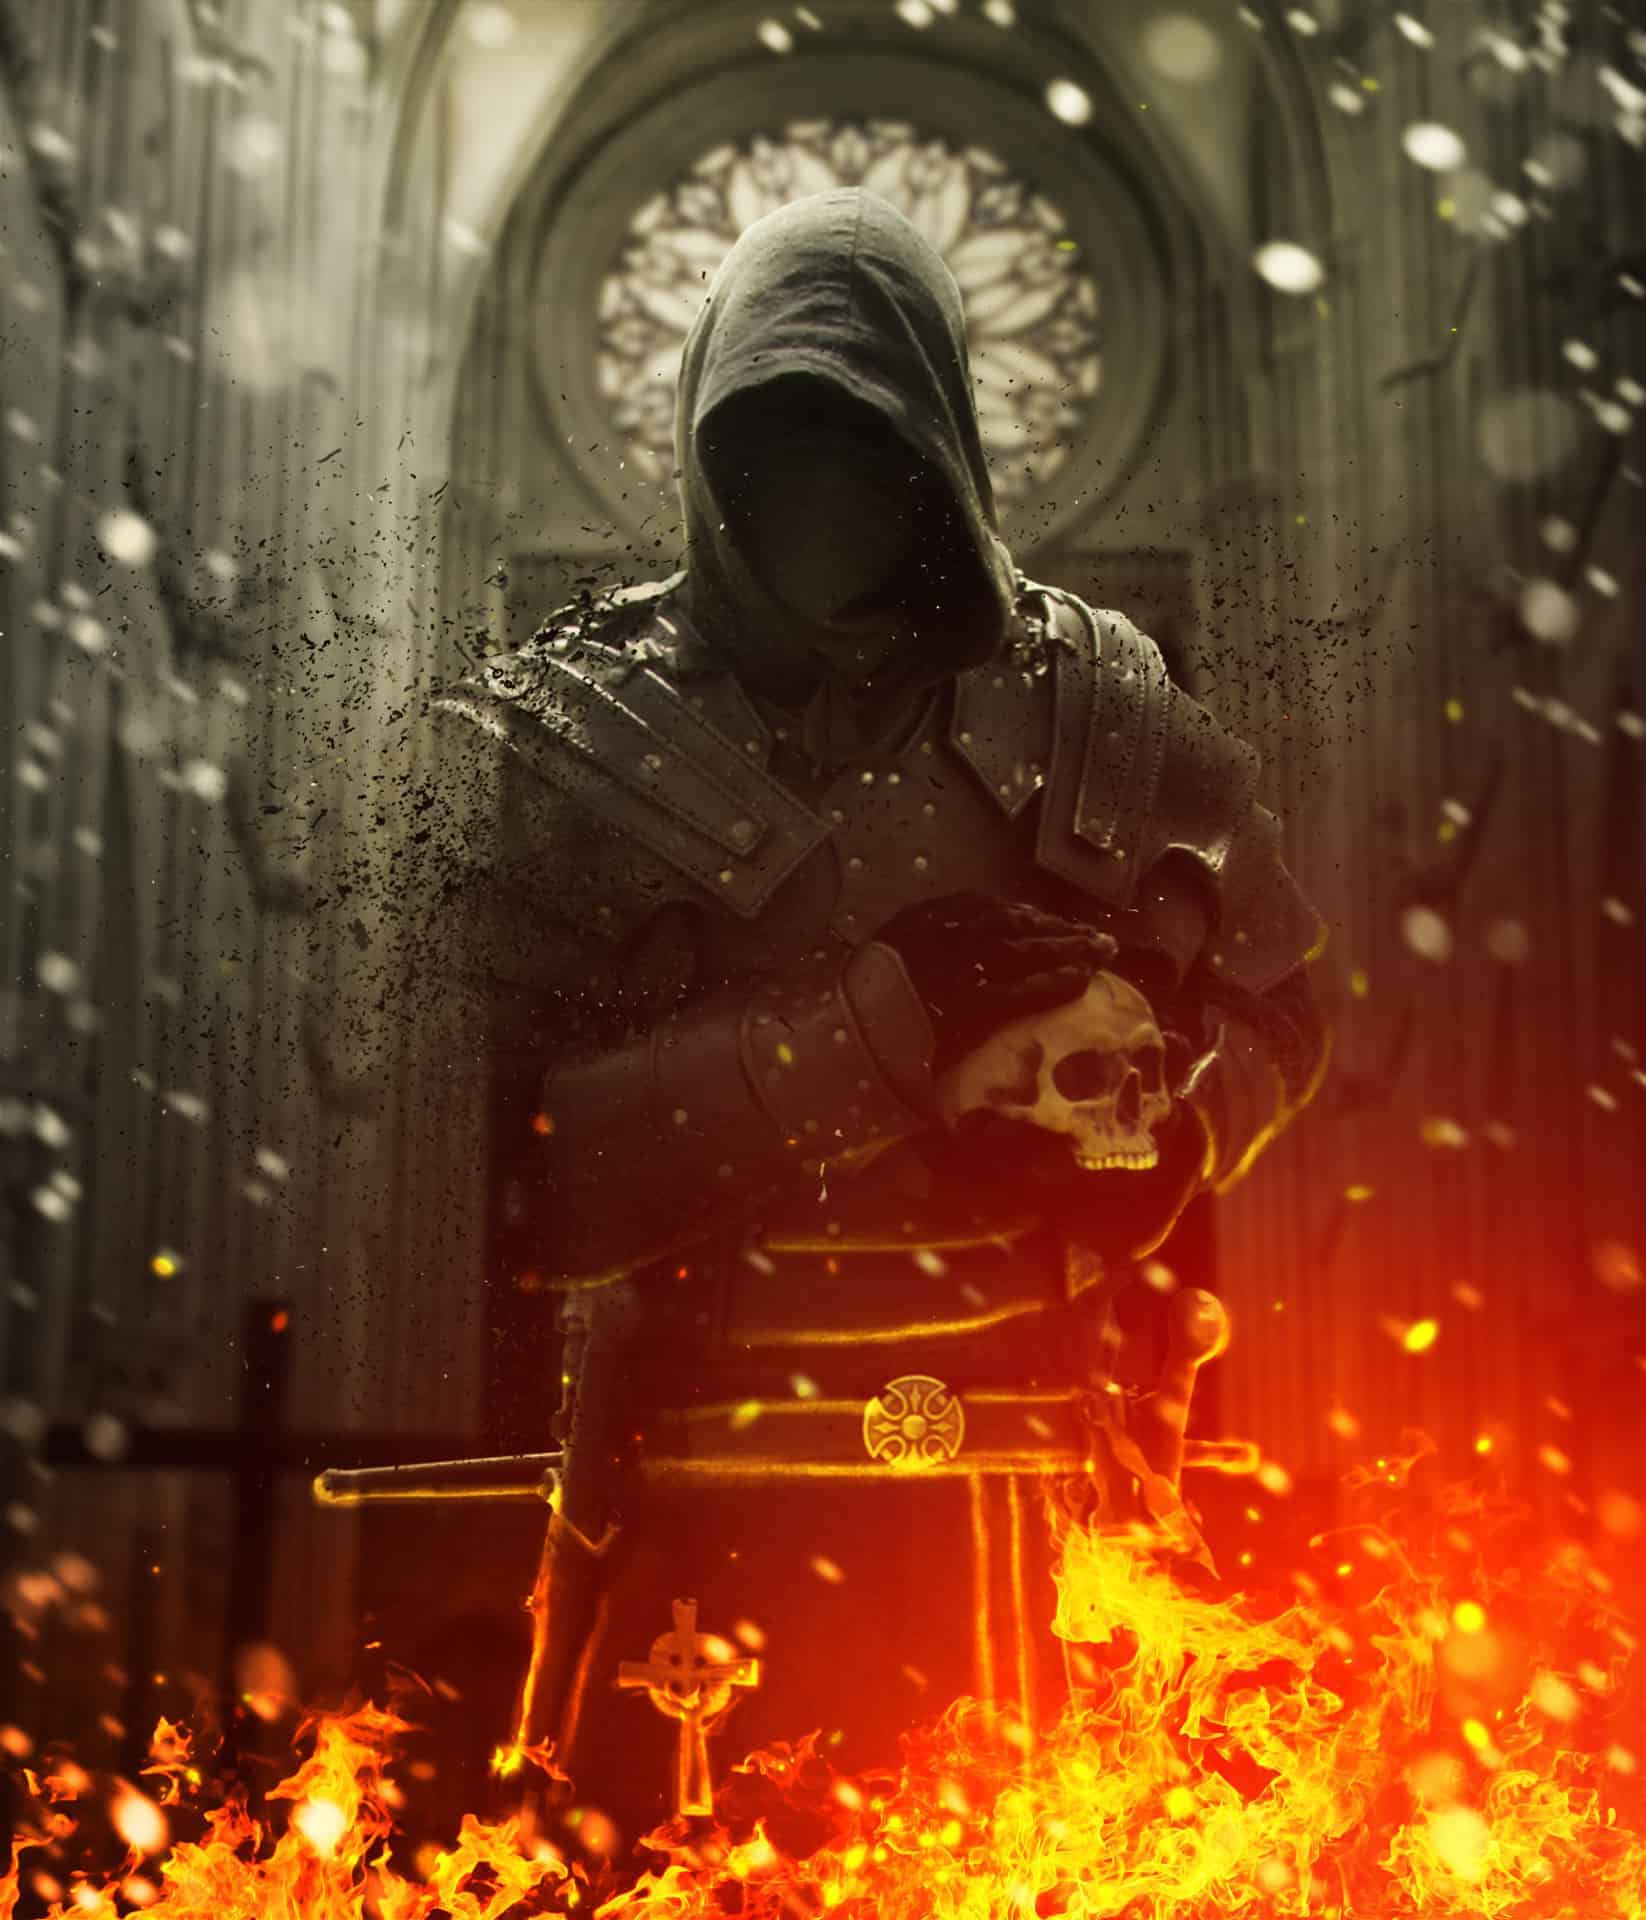 Create a Firing Medieval Scene with Disintegration Effect in Photoshop